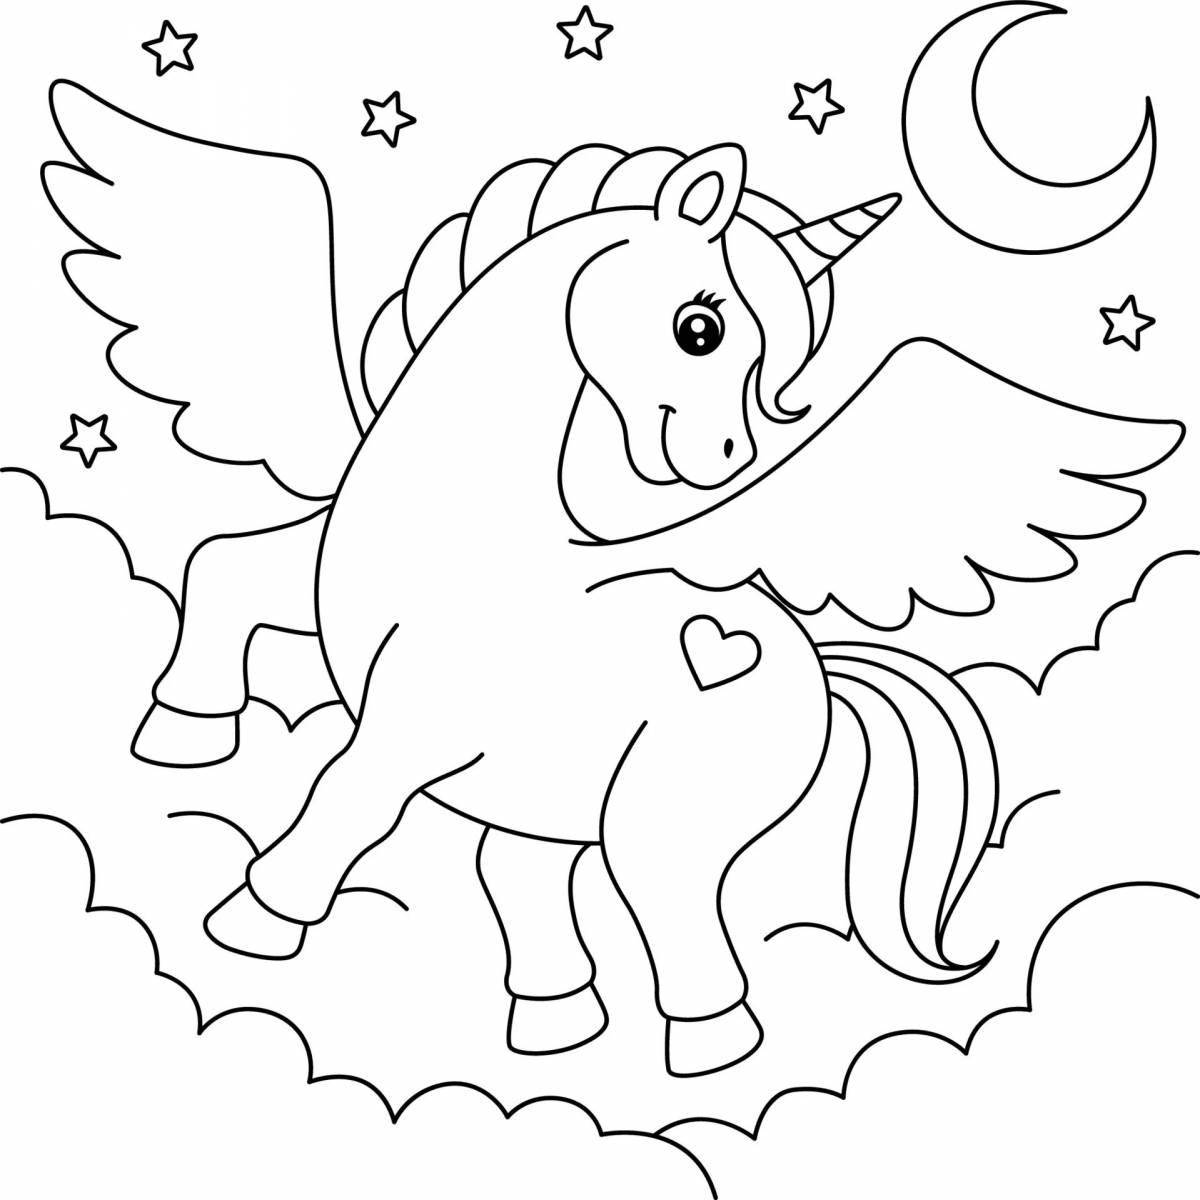 Glitter flying unicorns coloring page